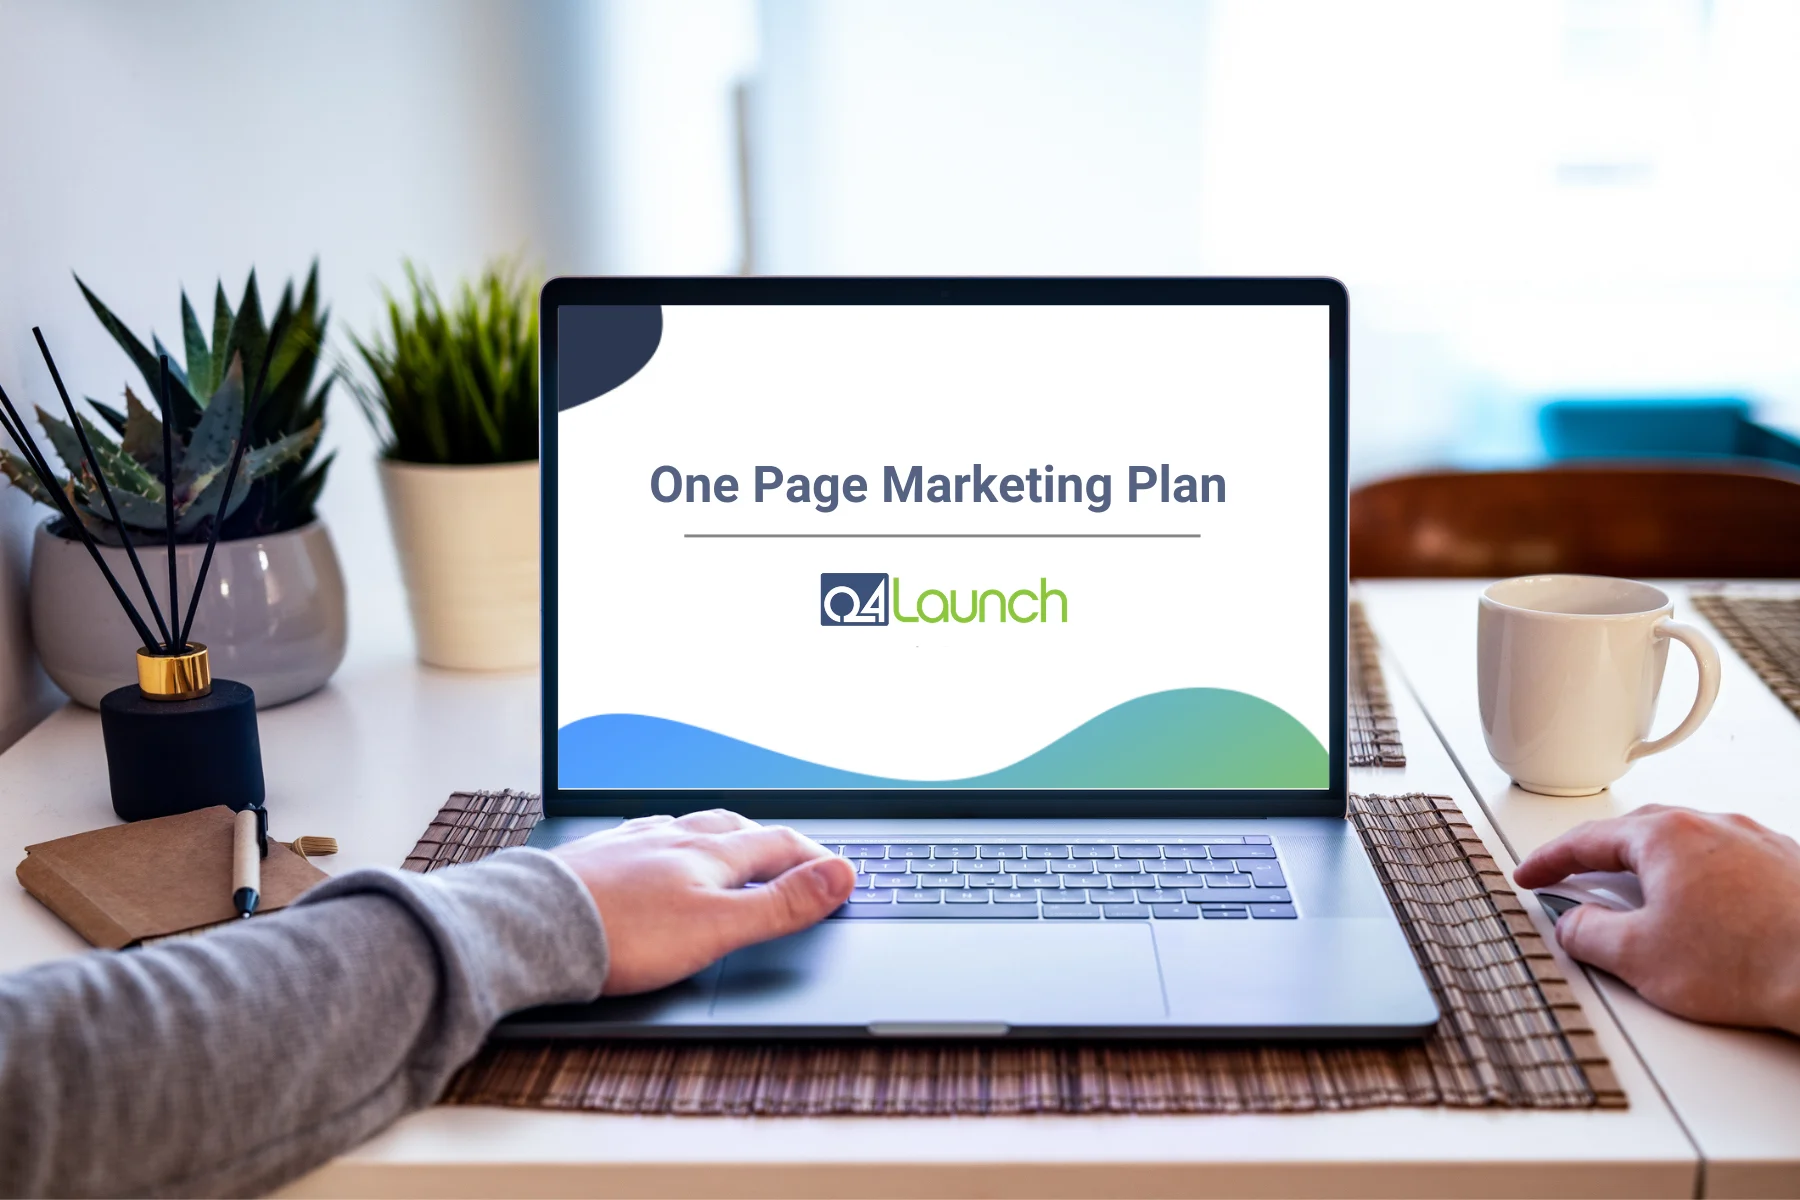 One Page Marketing Plan Snippet